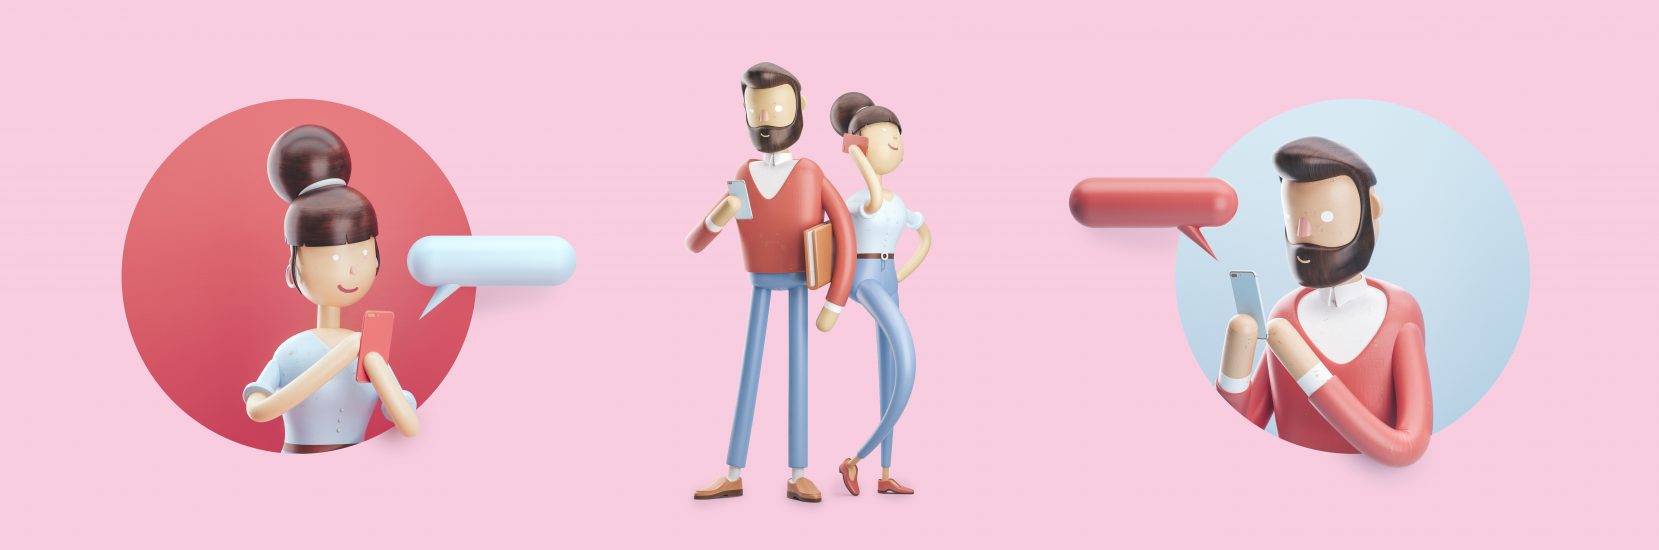 An example of 3D characters being used to show a couple texting each other using smartphones. 